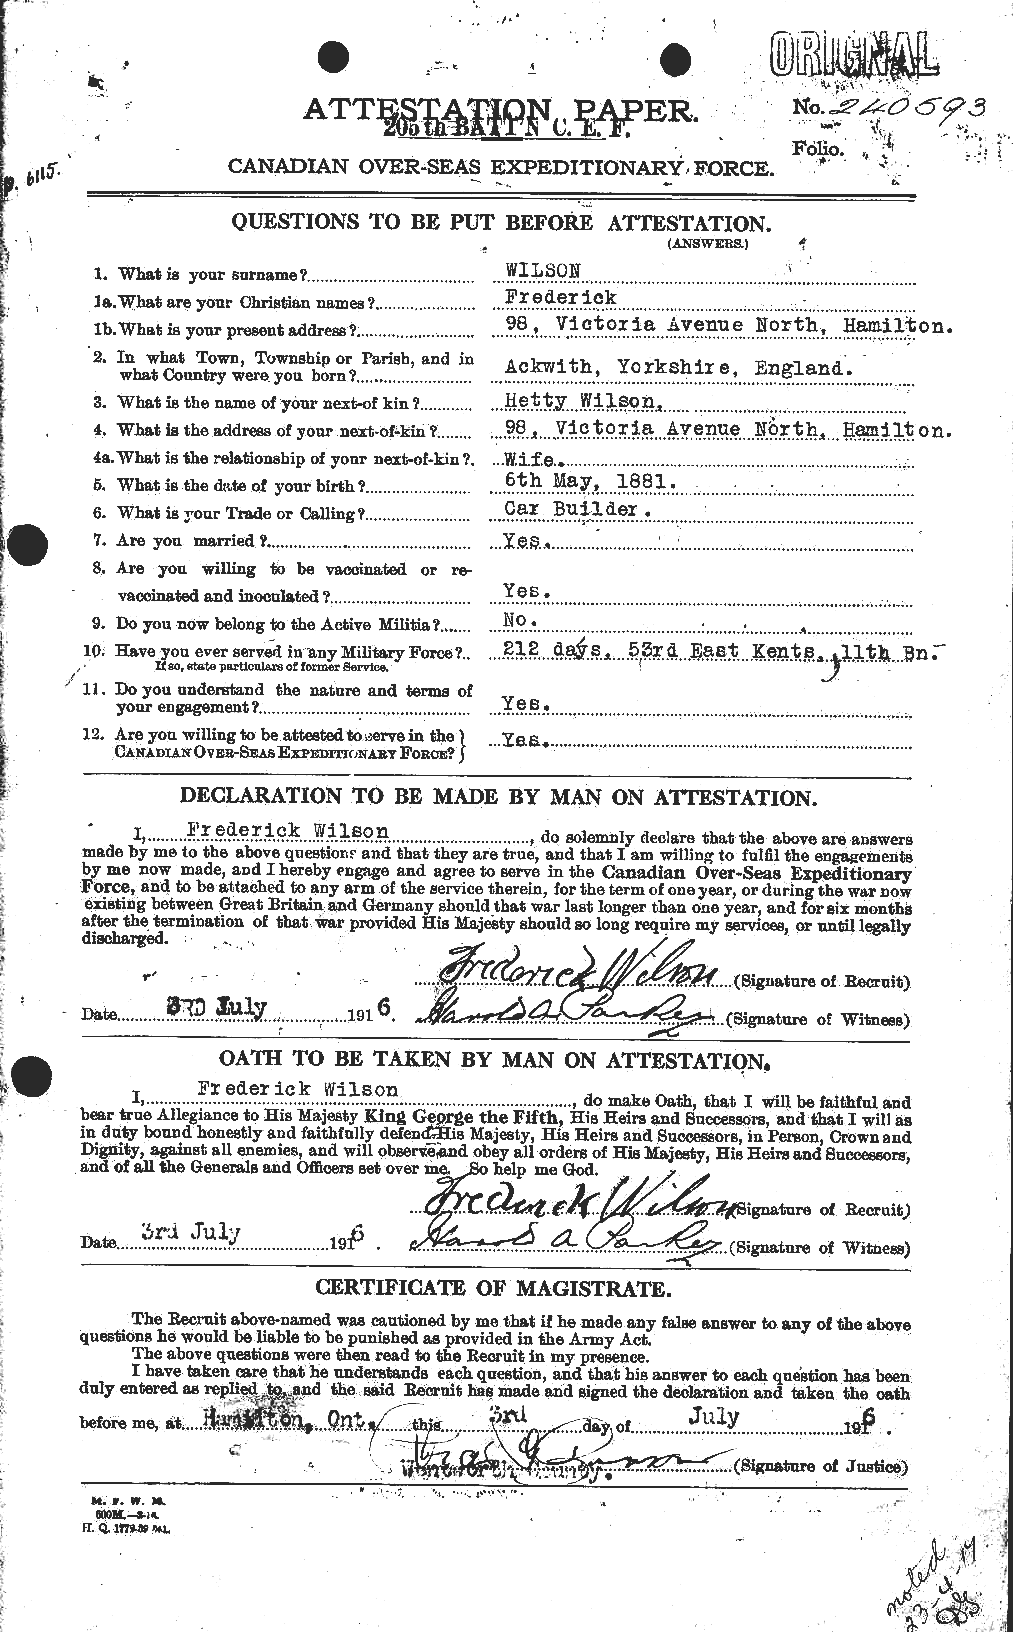 Personnel Records of the First World War - CEF 680711a